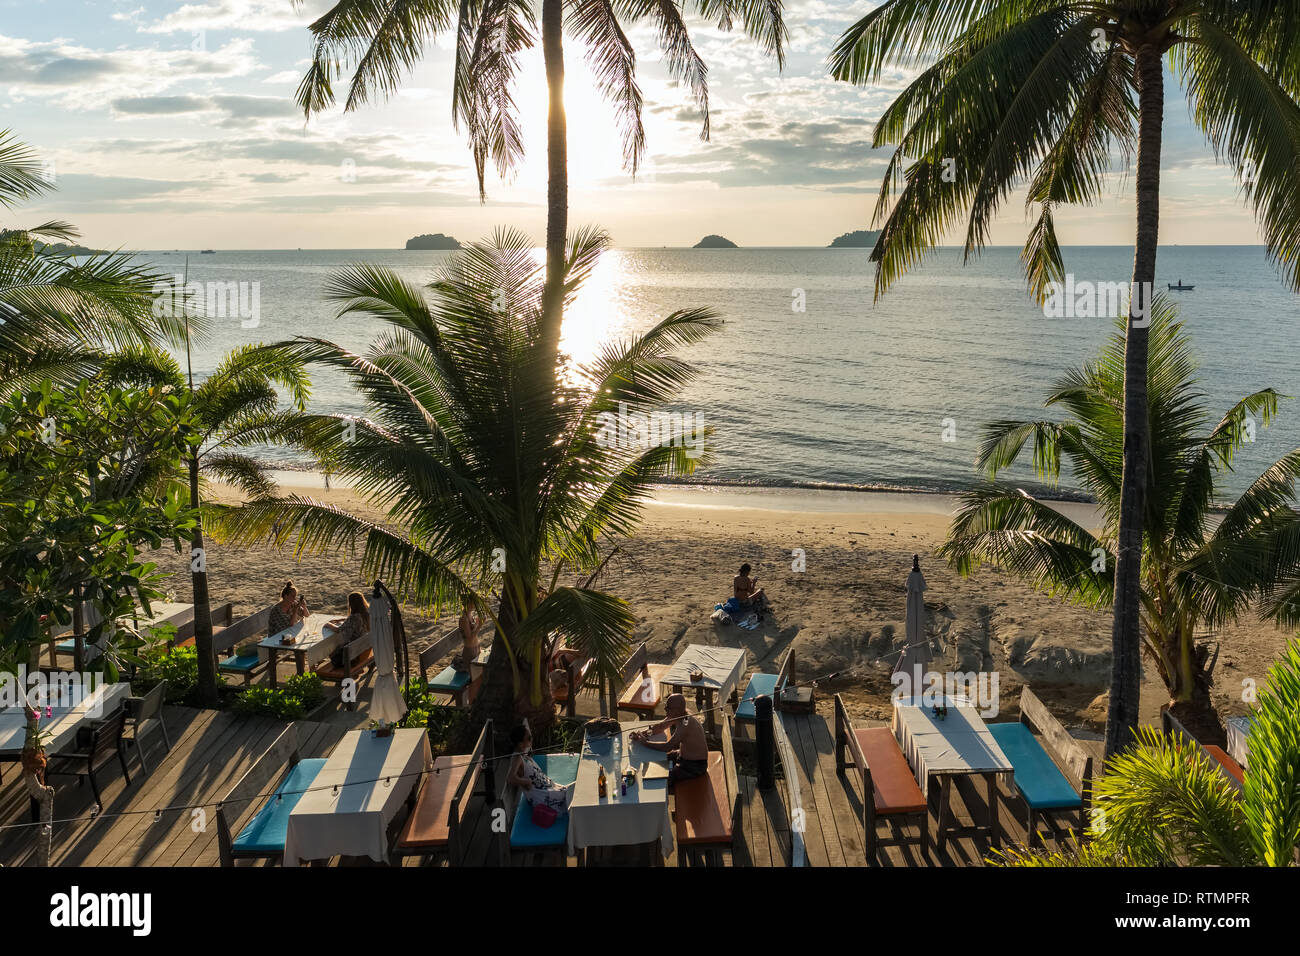 Koh Chang, Thailand - December 15, 2018: Sunset view outdoor cafe on Koh Chang island, Thailand Stock Photo